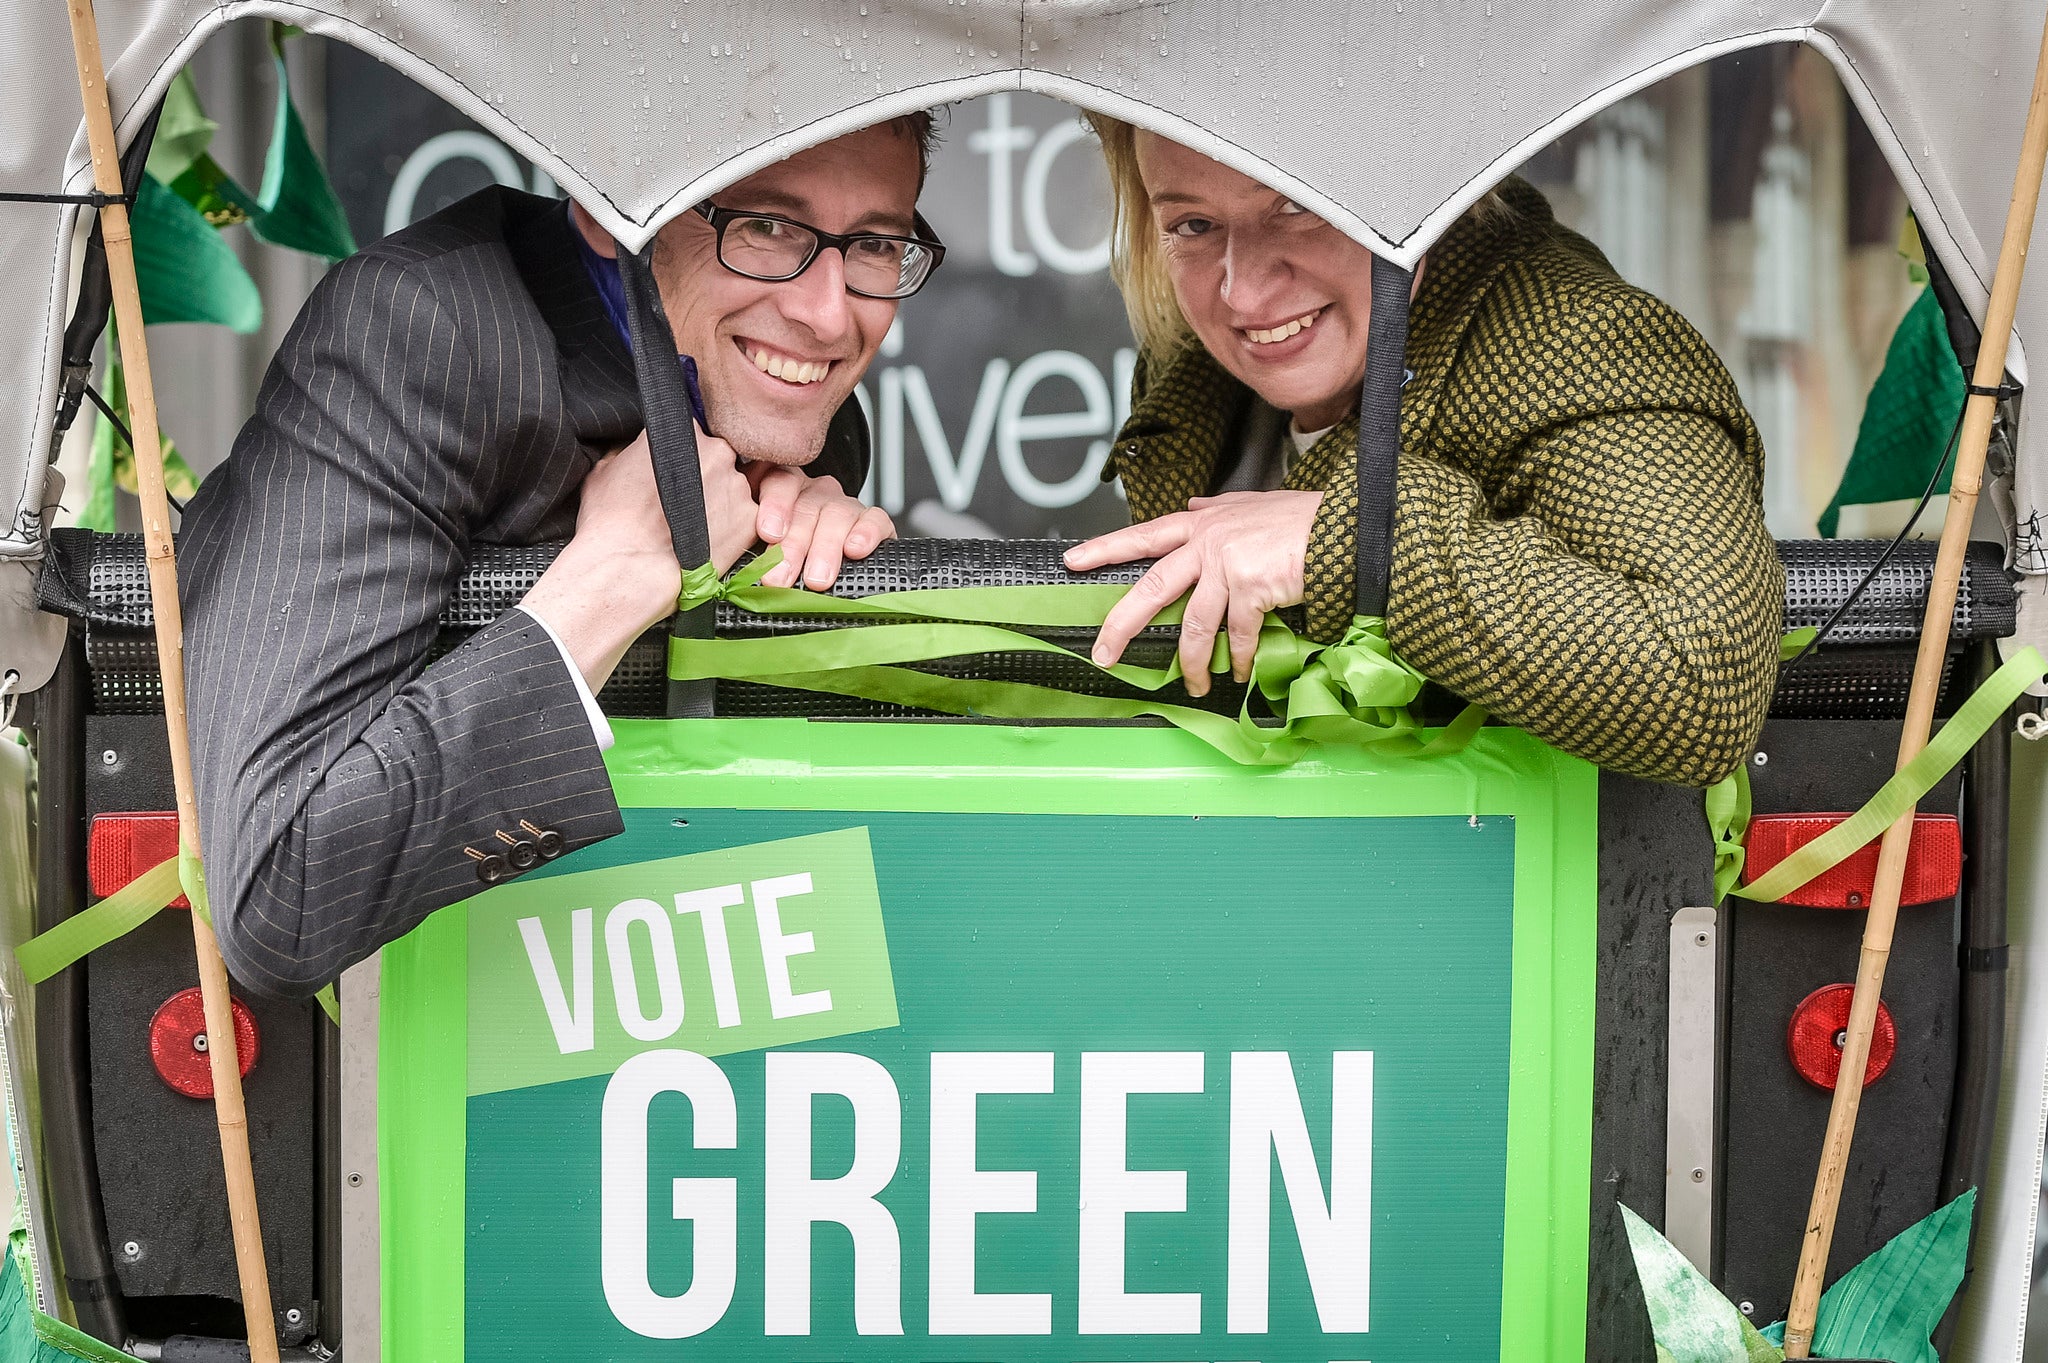 Natalie Bennett campaigns with Darren Hall, Green candidate for the party's target seat Bristol West